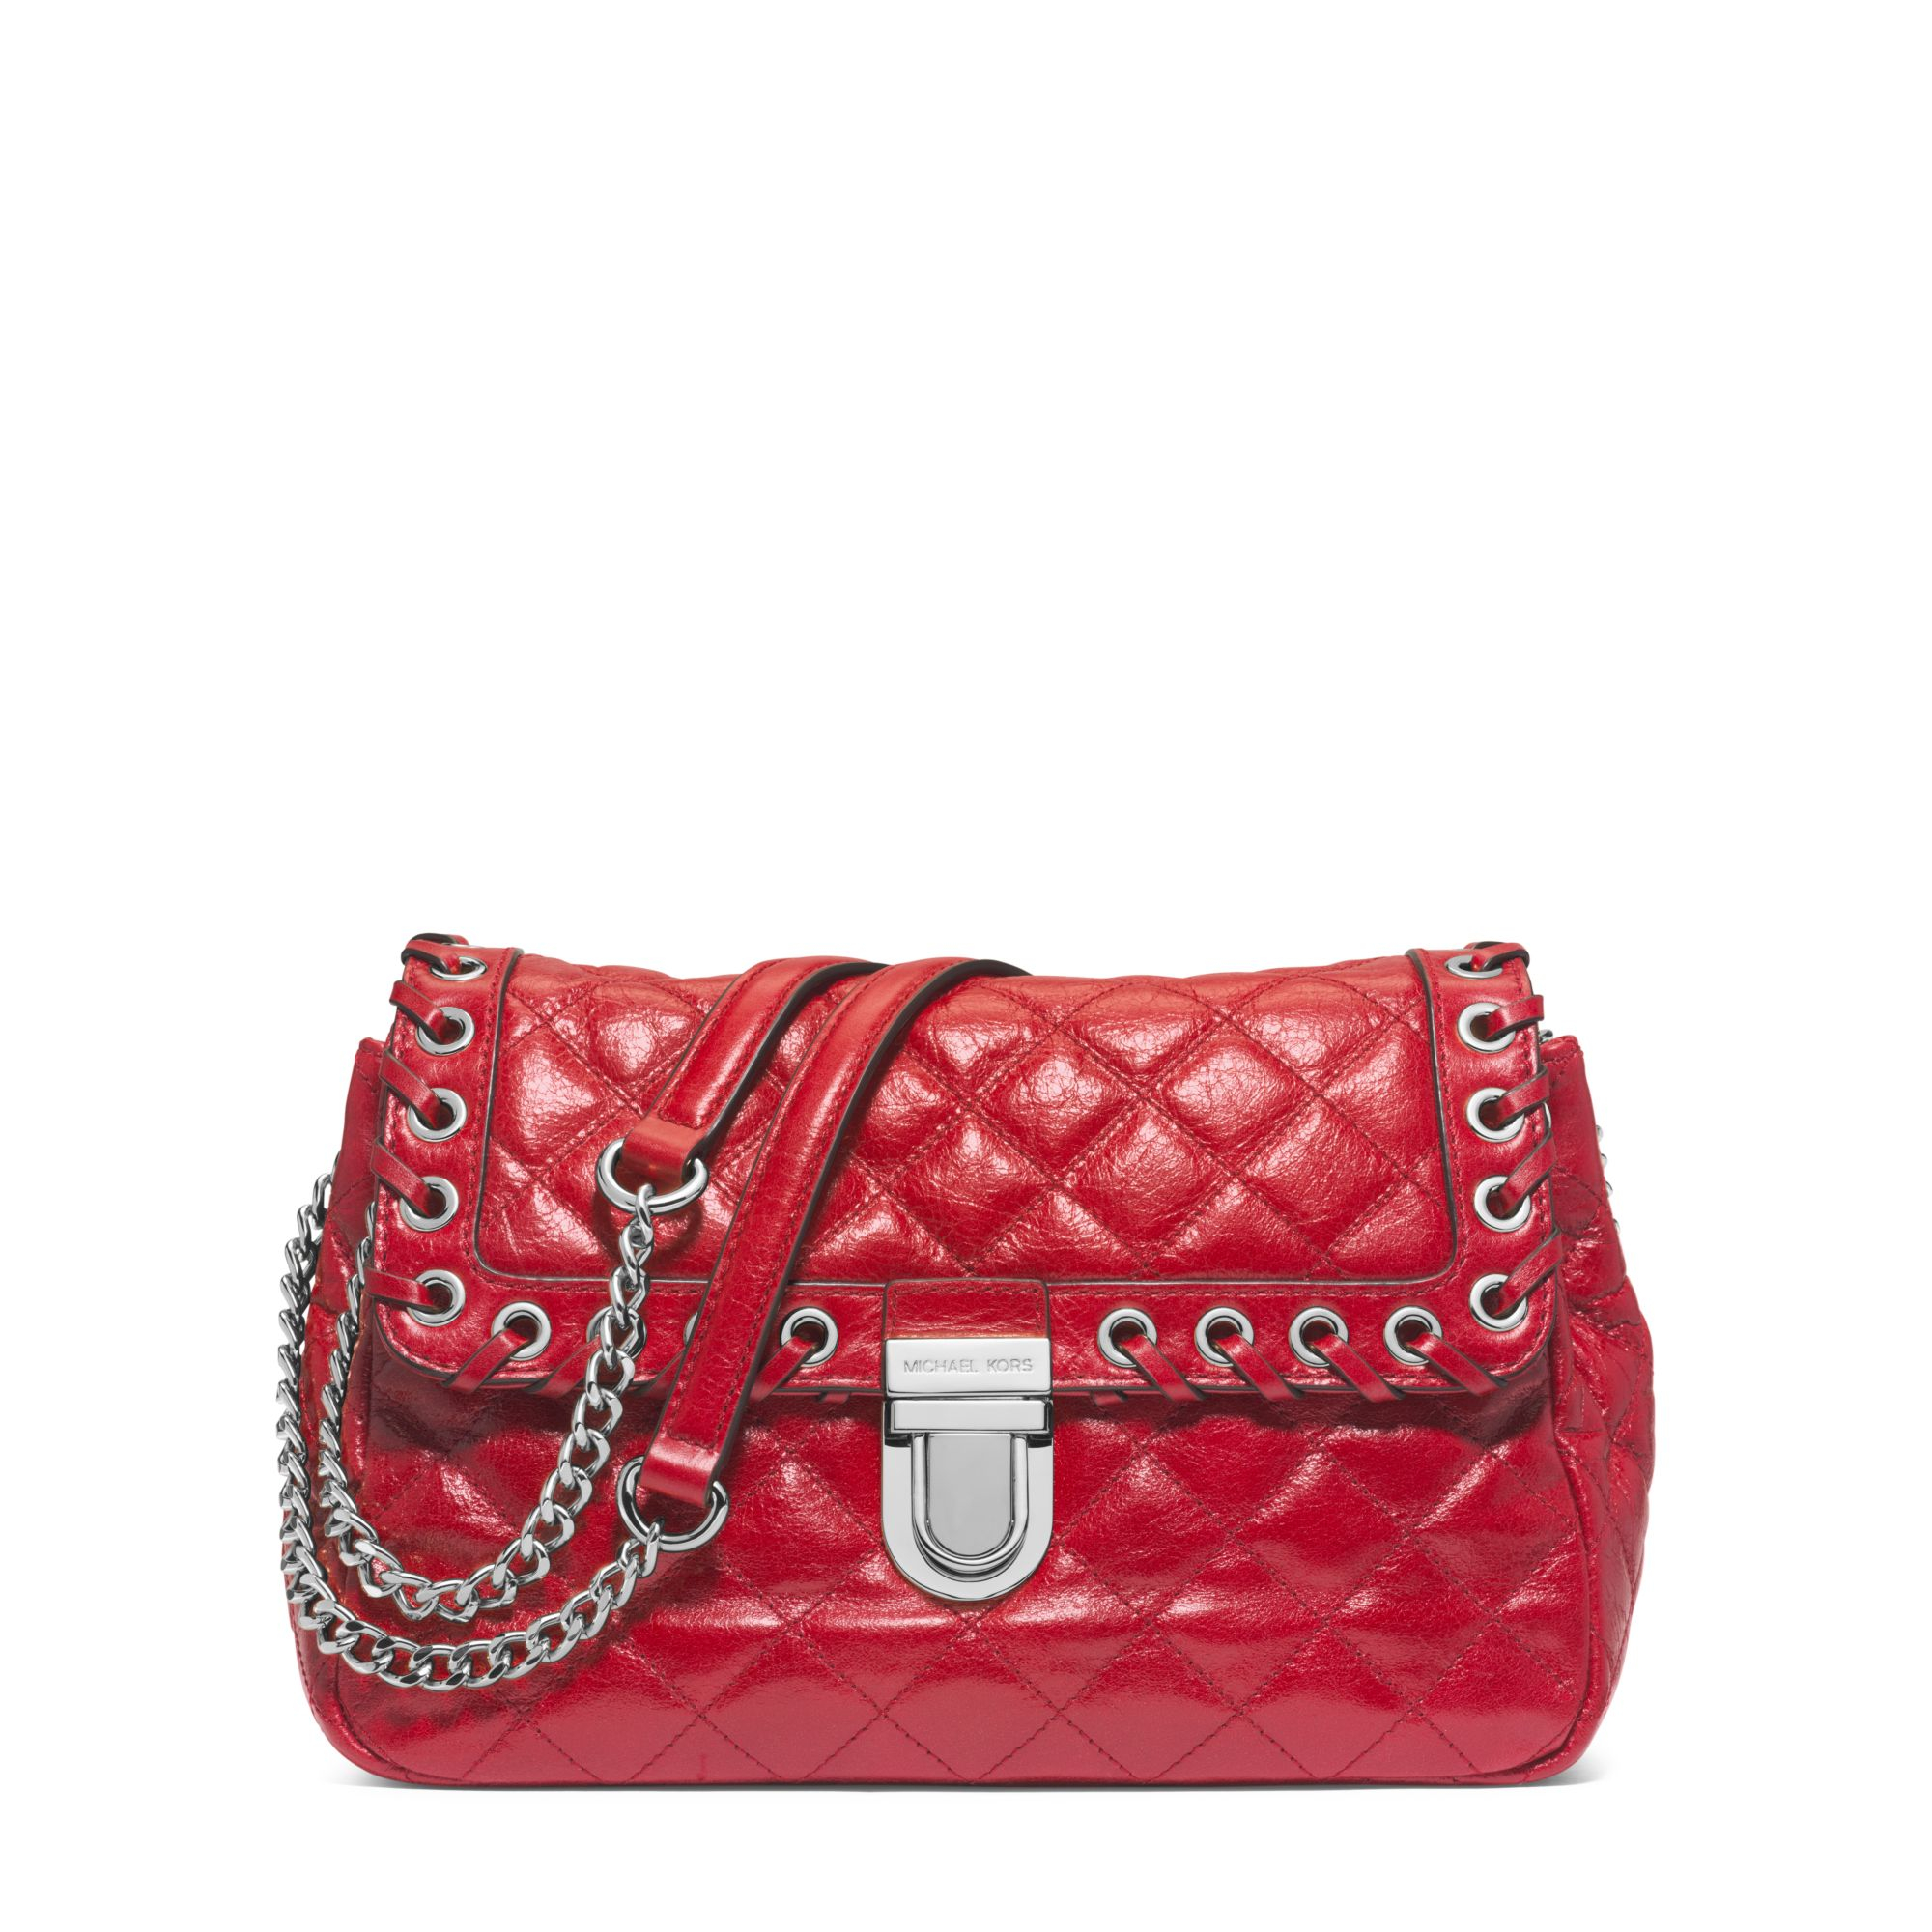 Michael Kors Sloan Large Quilted-Leather Shoulder Bag in Dark Red (Red) - Lyst